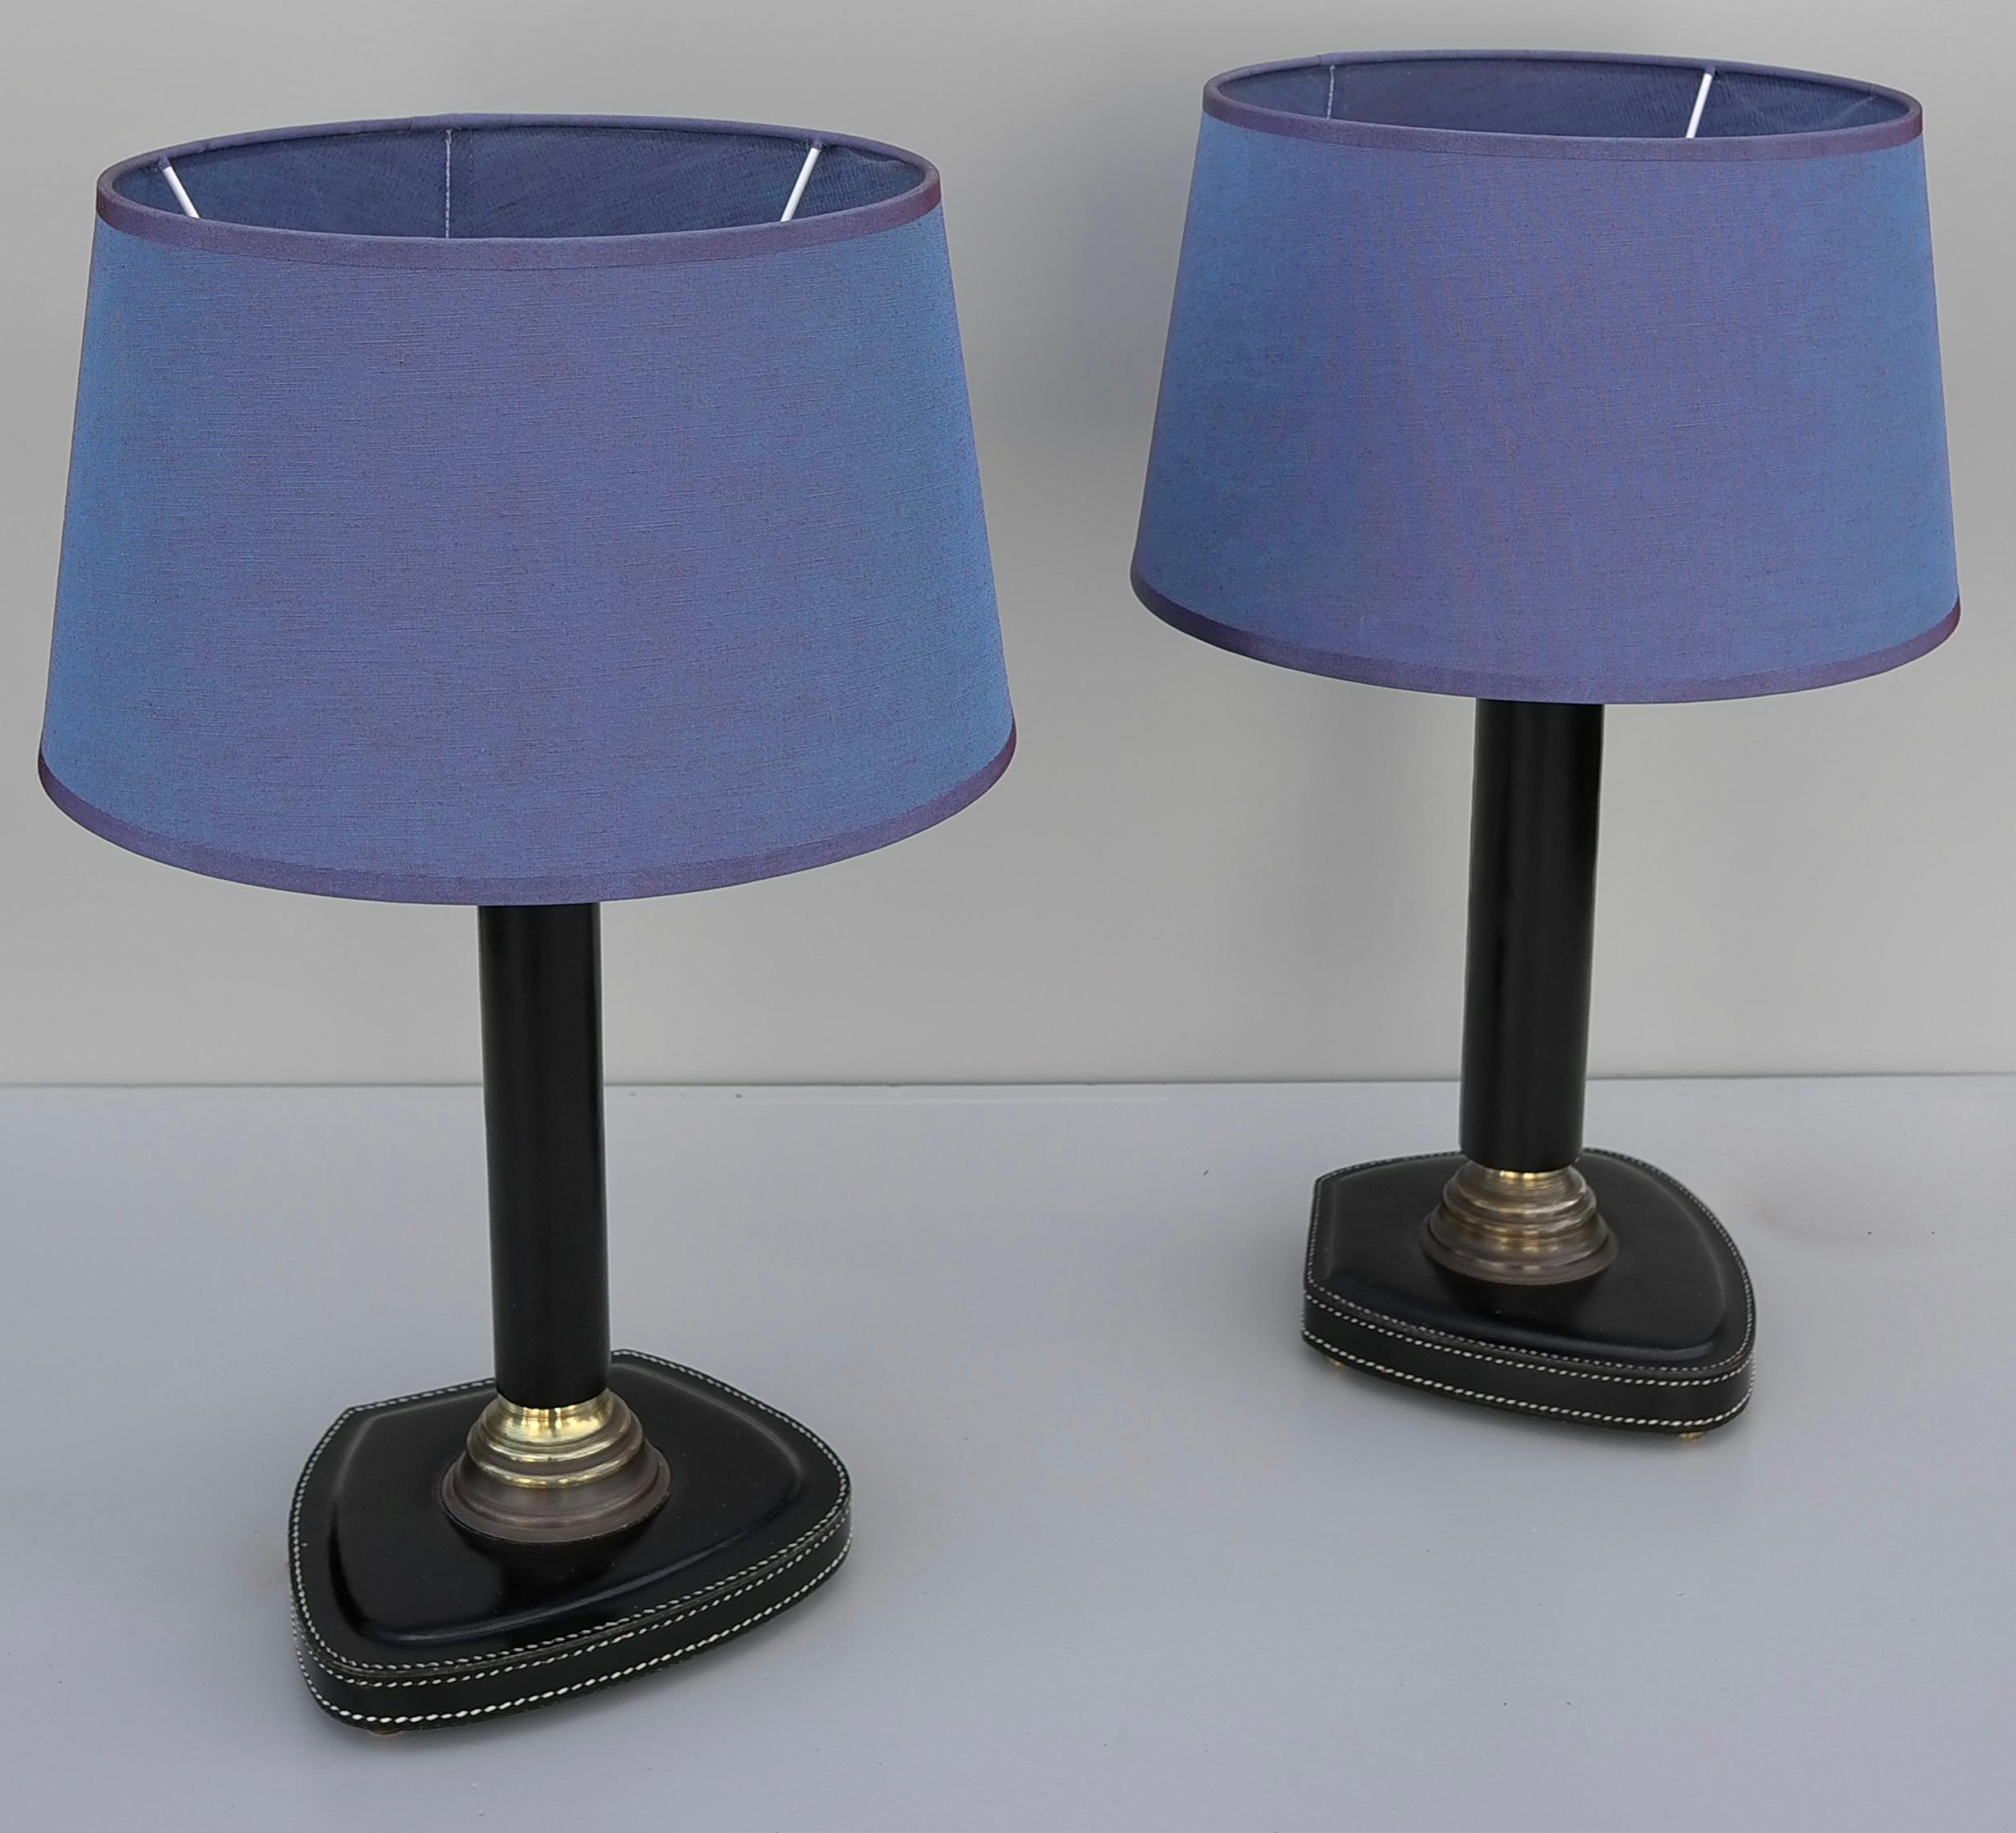 Pair of Hand-Stitched Black Leather Table Lamps, France, 1960s
